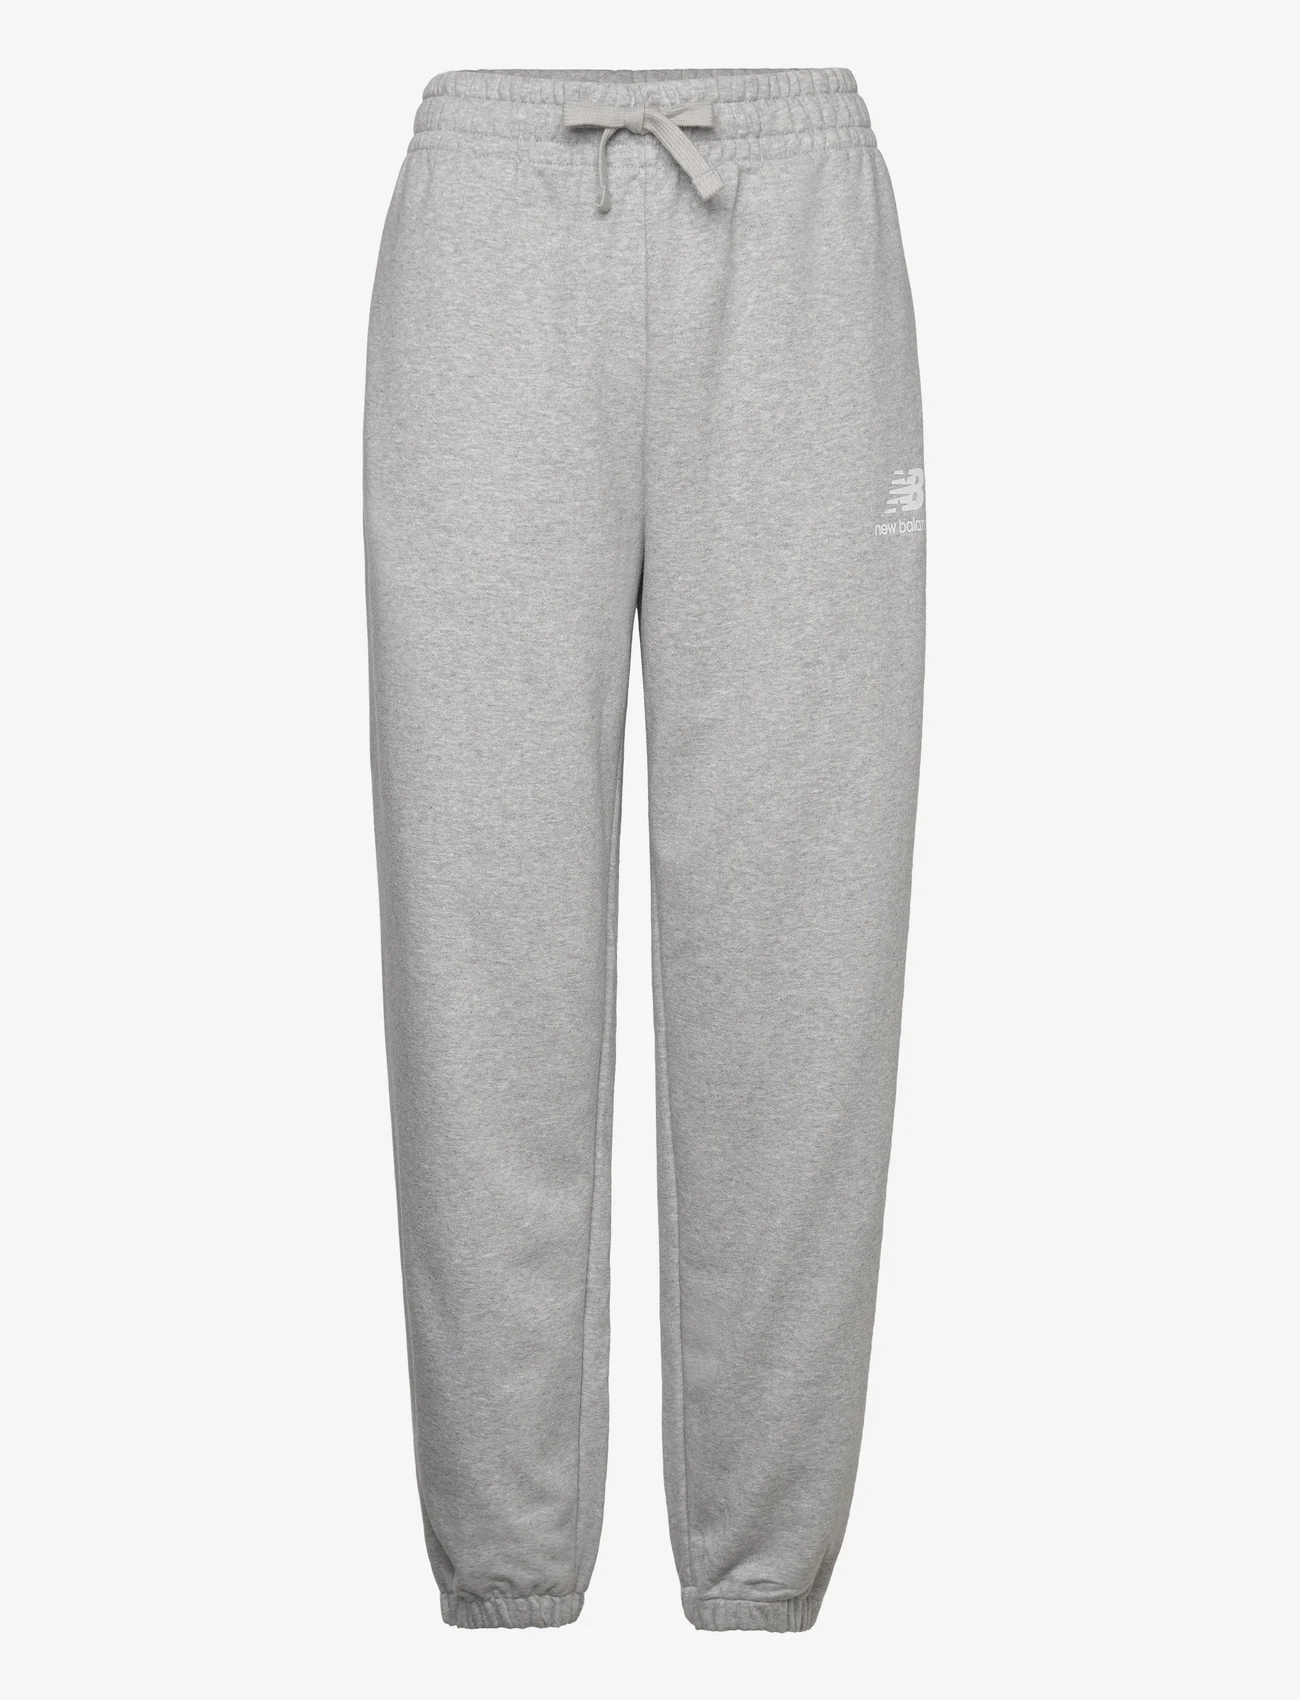 New Balance - Essentials Stacked Logo French Terry Sweatpant - athletic grey - 0